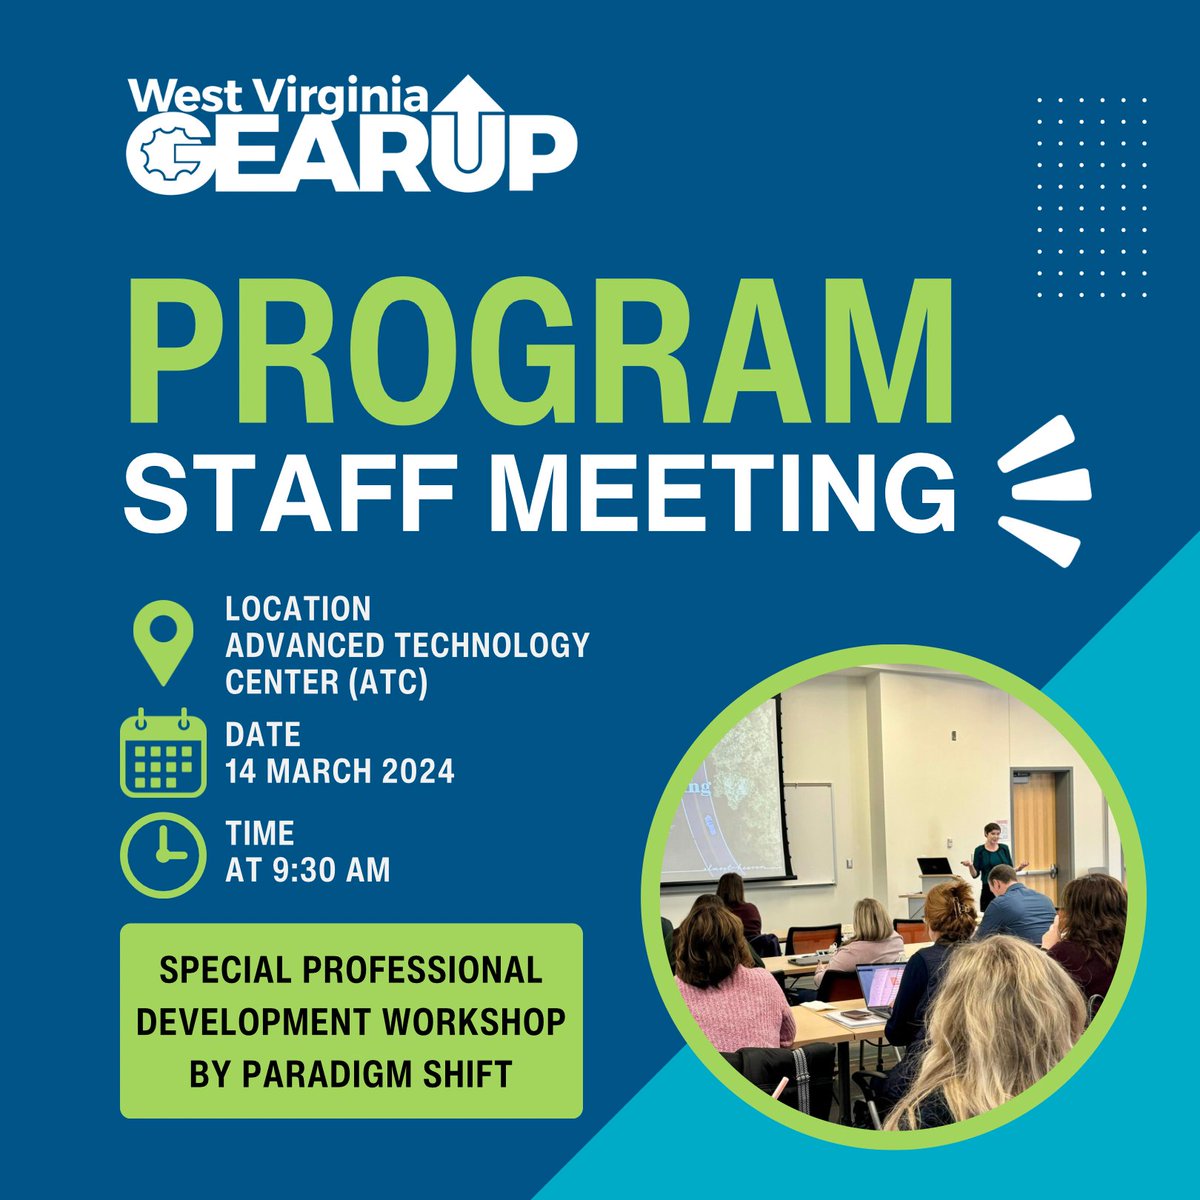 We are excited for tomorrow’s Program Staff Meeting. We are especially thrilled to have Paradigm Shift join us for a special professional development seminar. See you tomorrow! #GEARUPworks